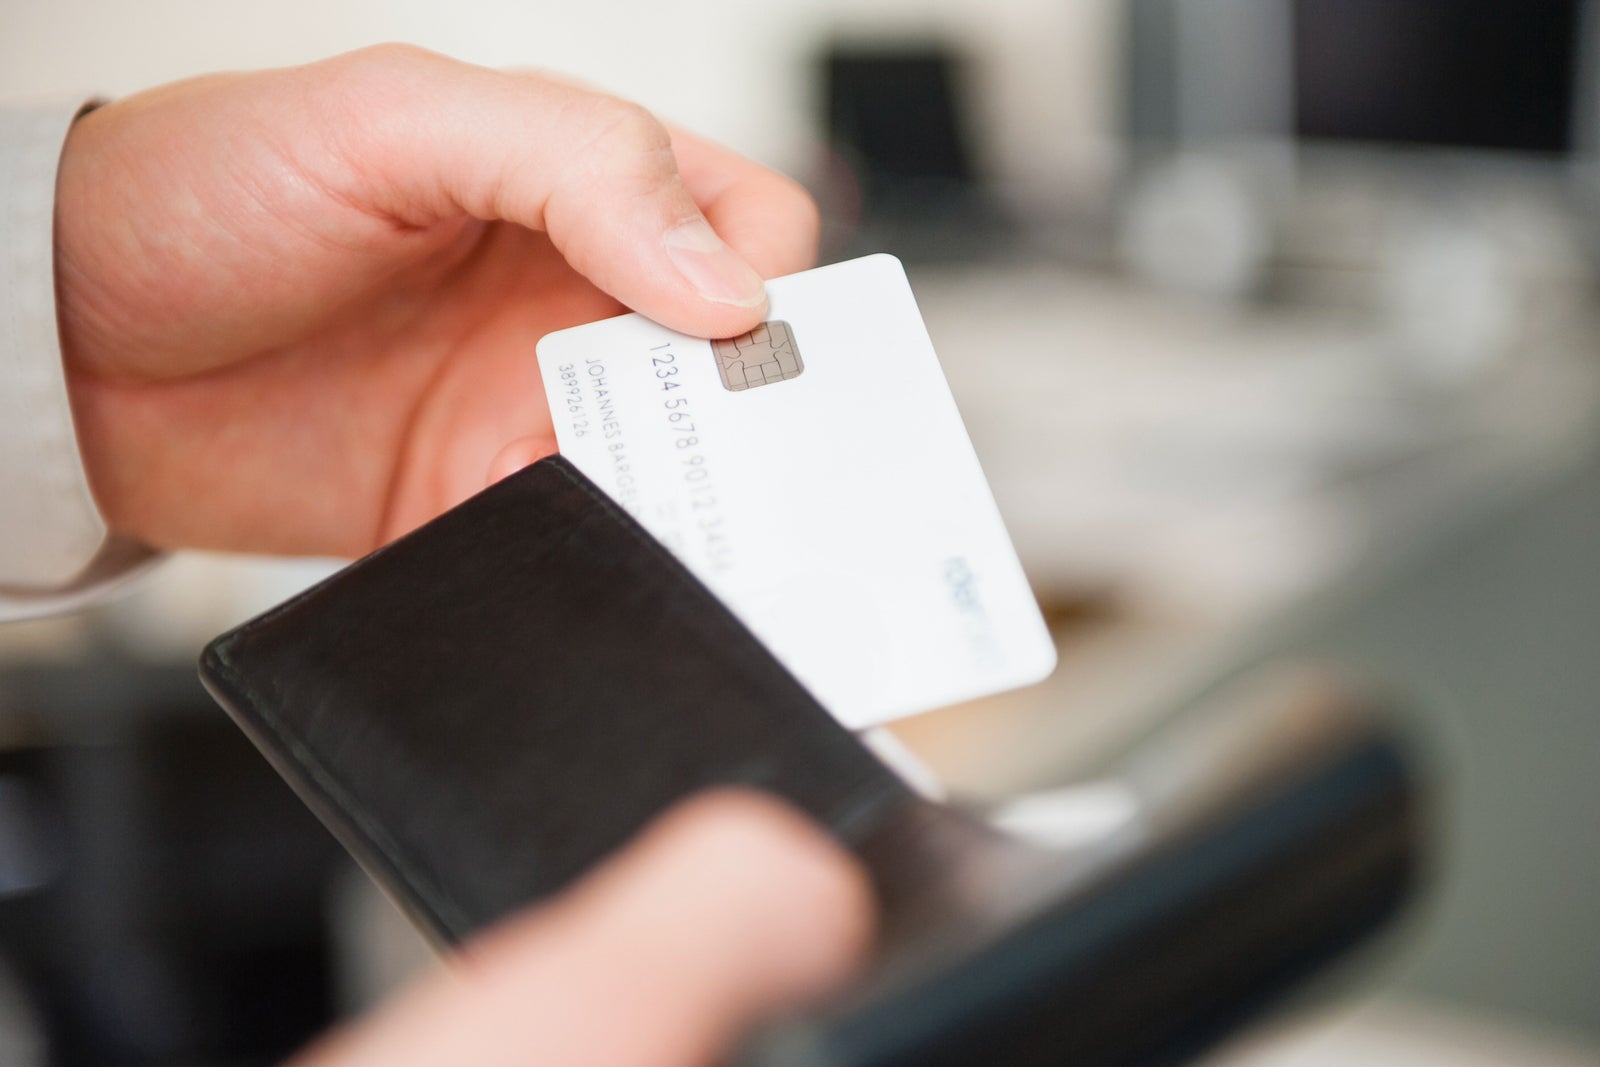 How to clean your credit cards